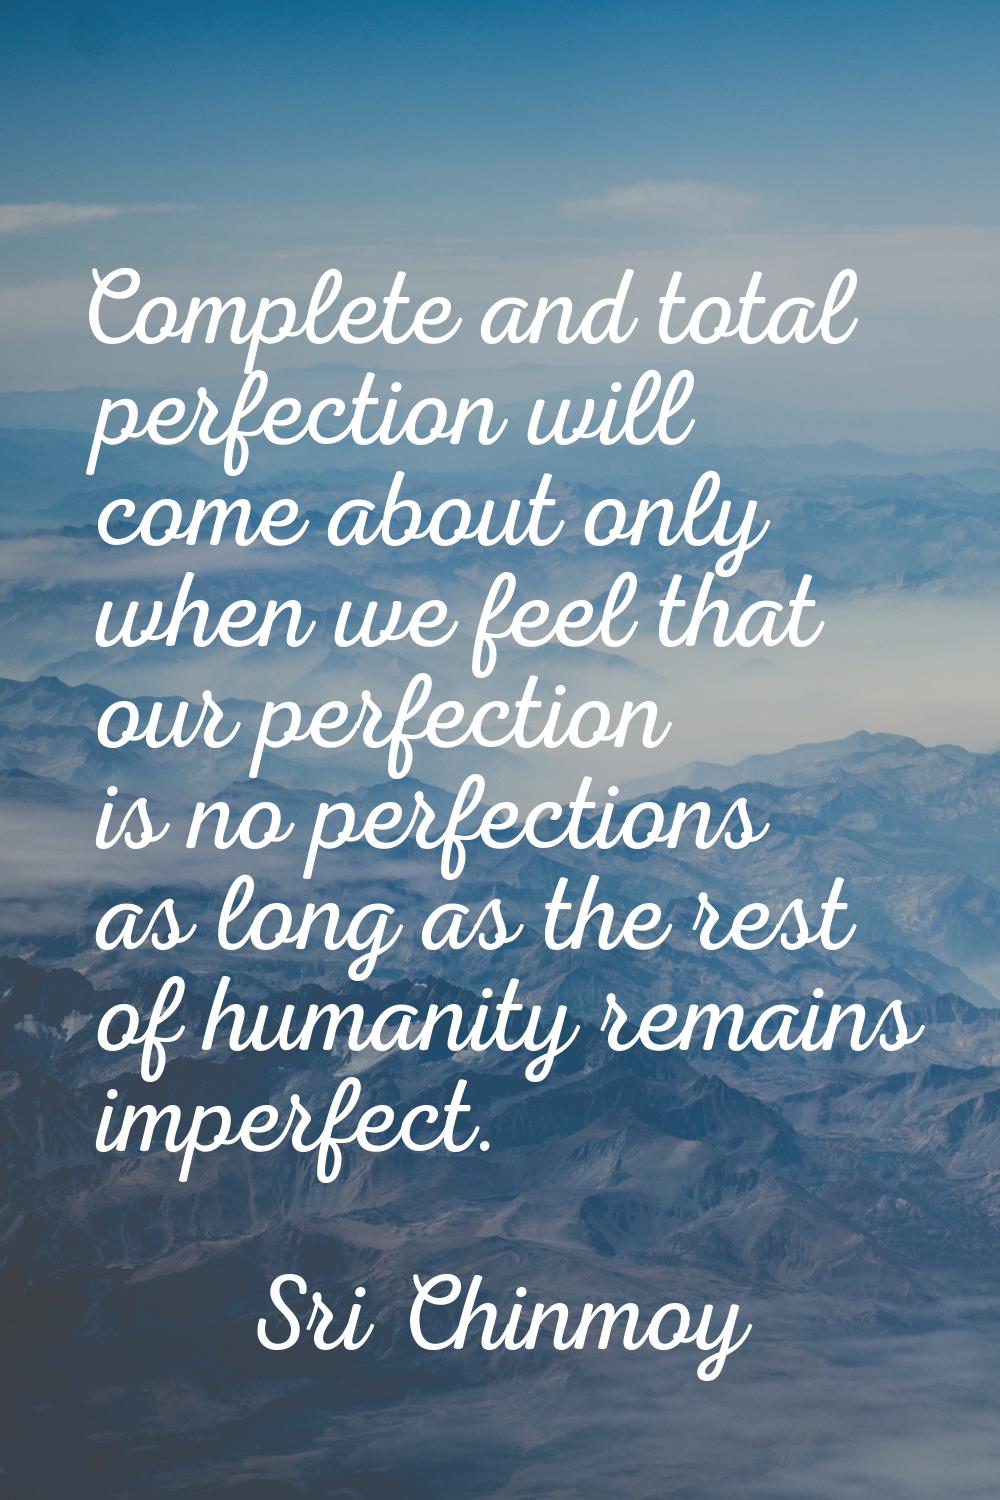 Complete and total perfection will come about only when we feel that our perfection is no perfectio